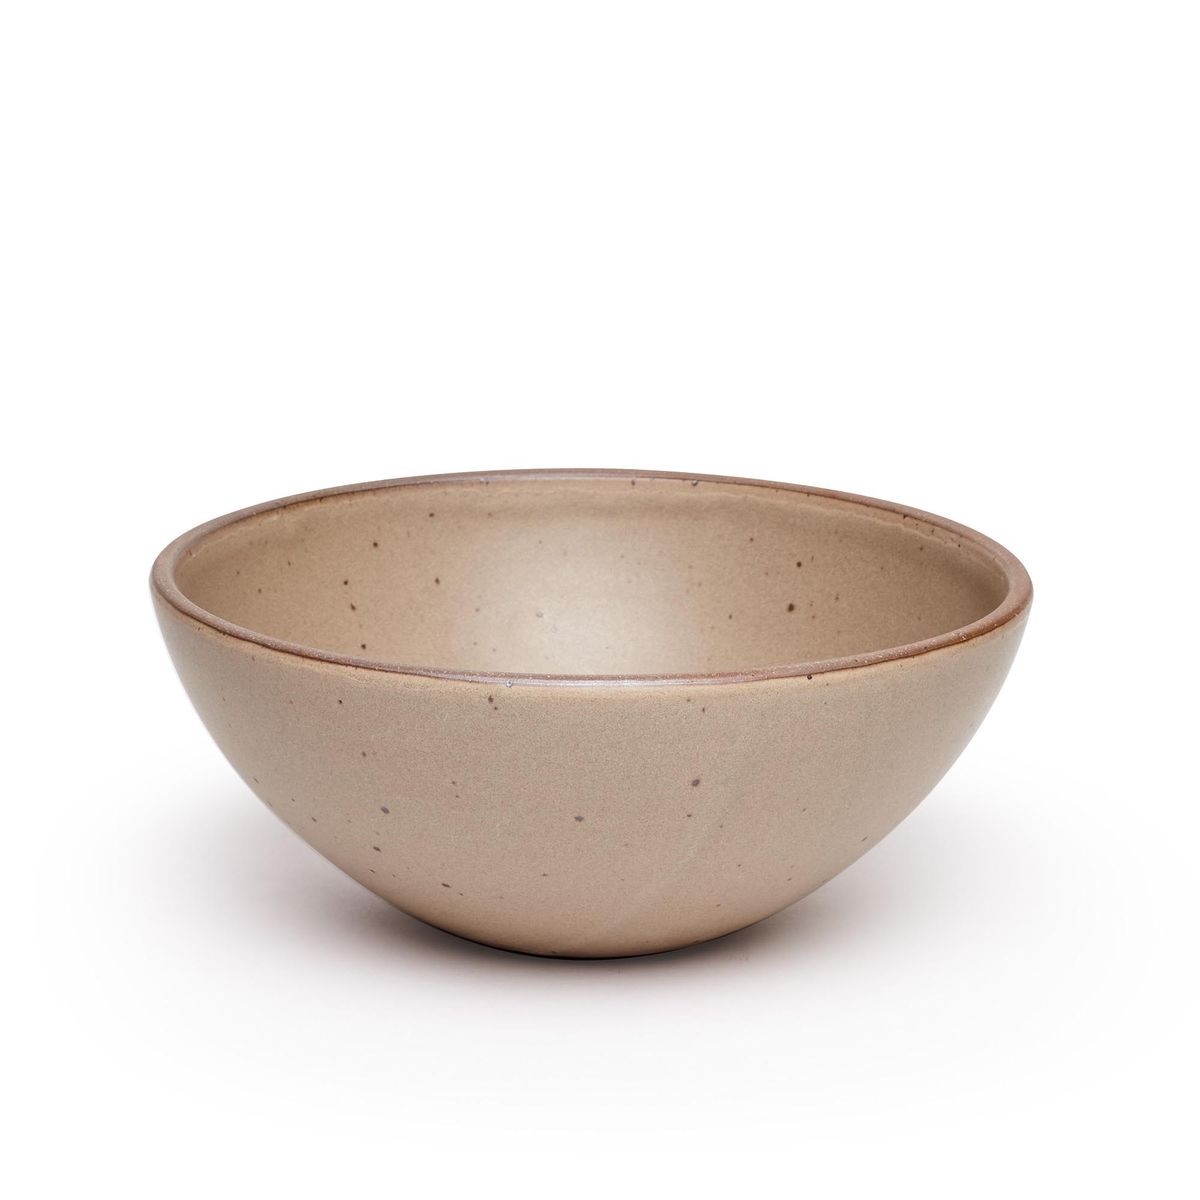 A large ceramic mixing bowl in a warm pale brown color featuring iron speckles and an unglazed rim